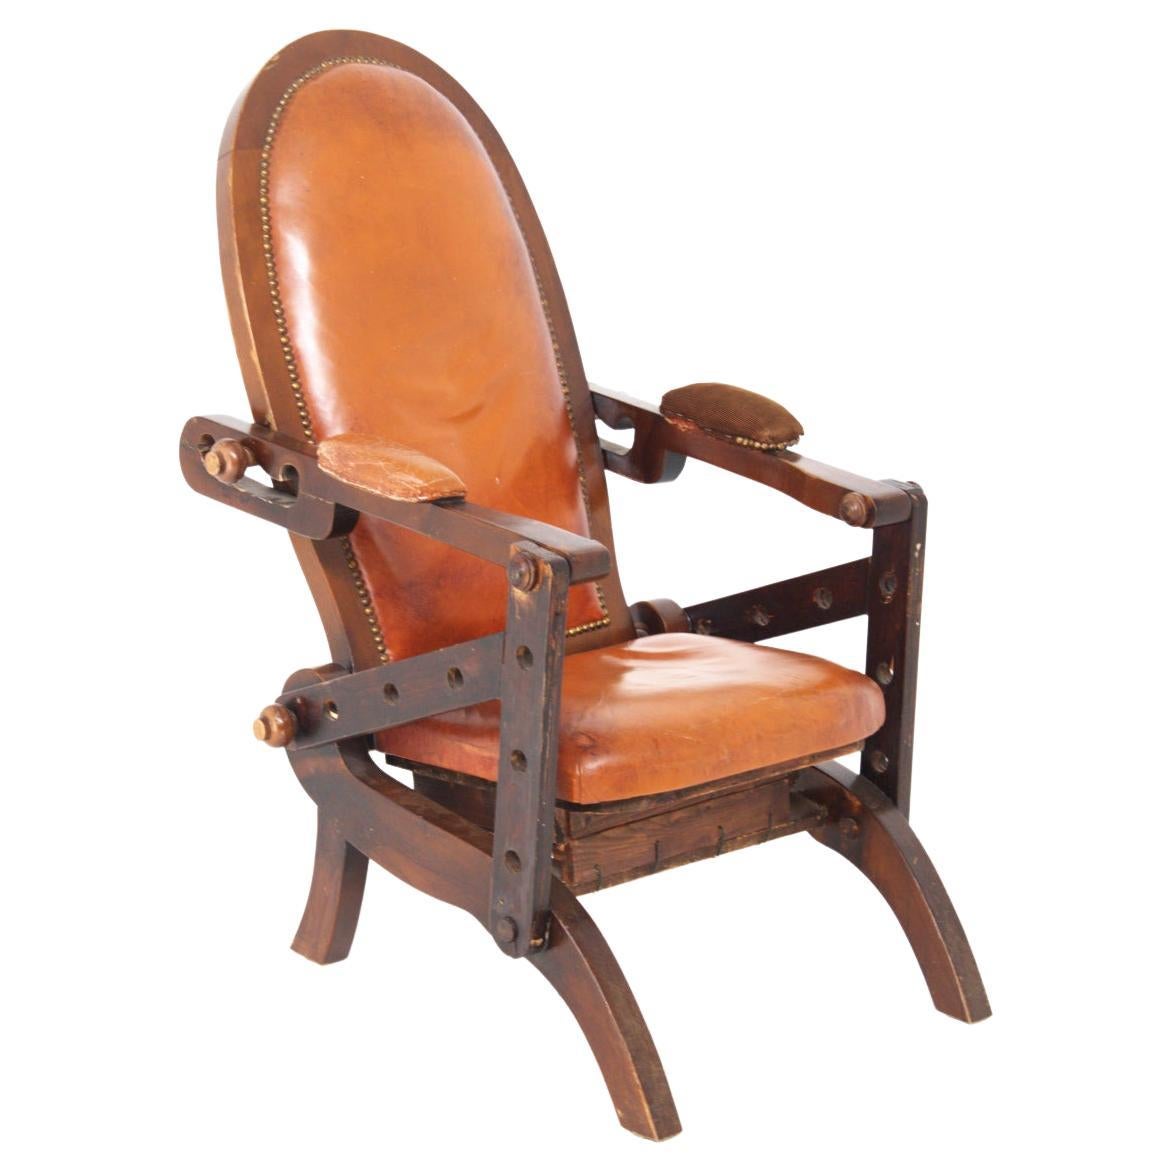 Italian Rustic Style Leather and Wood Armchair